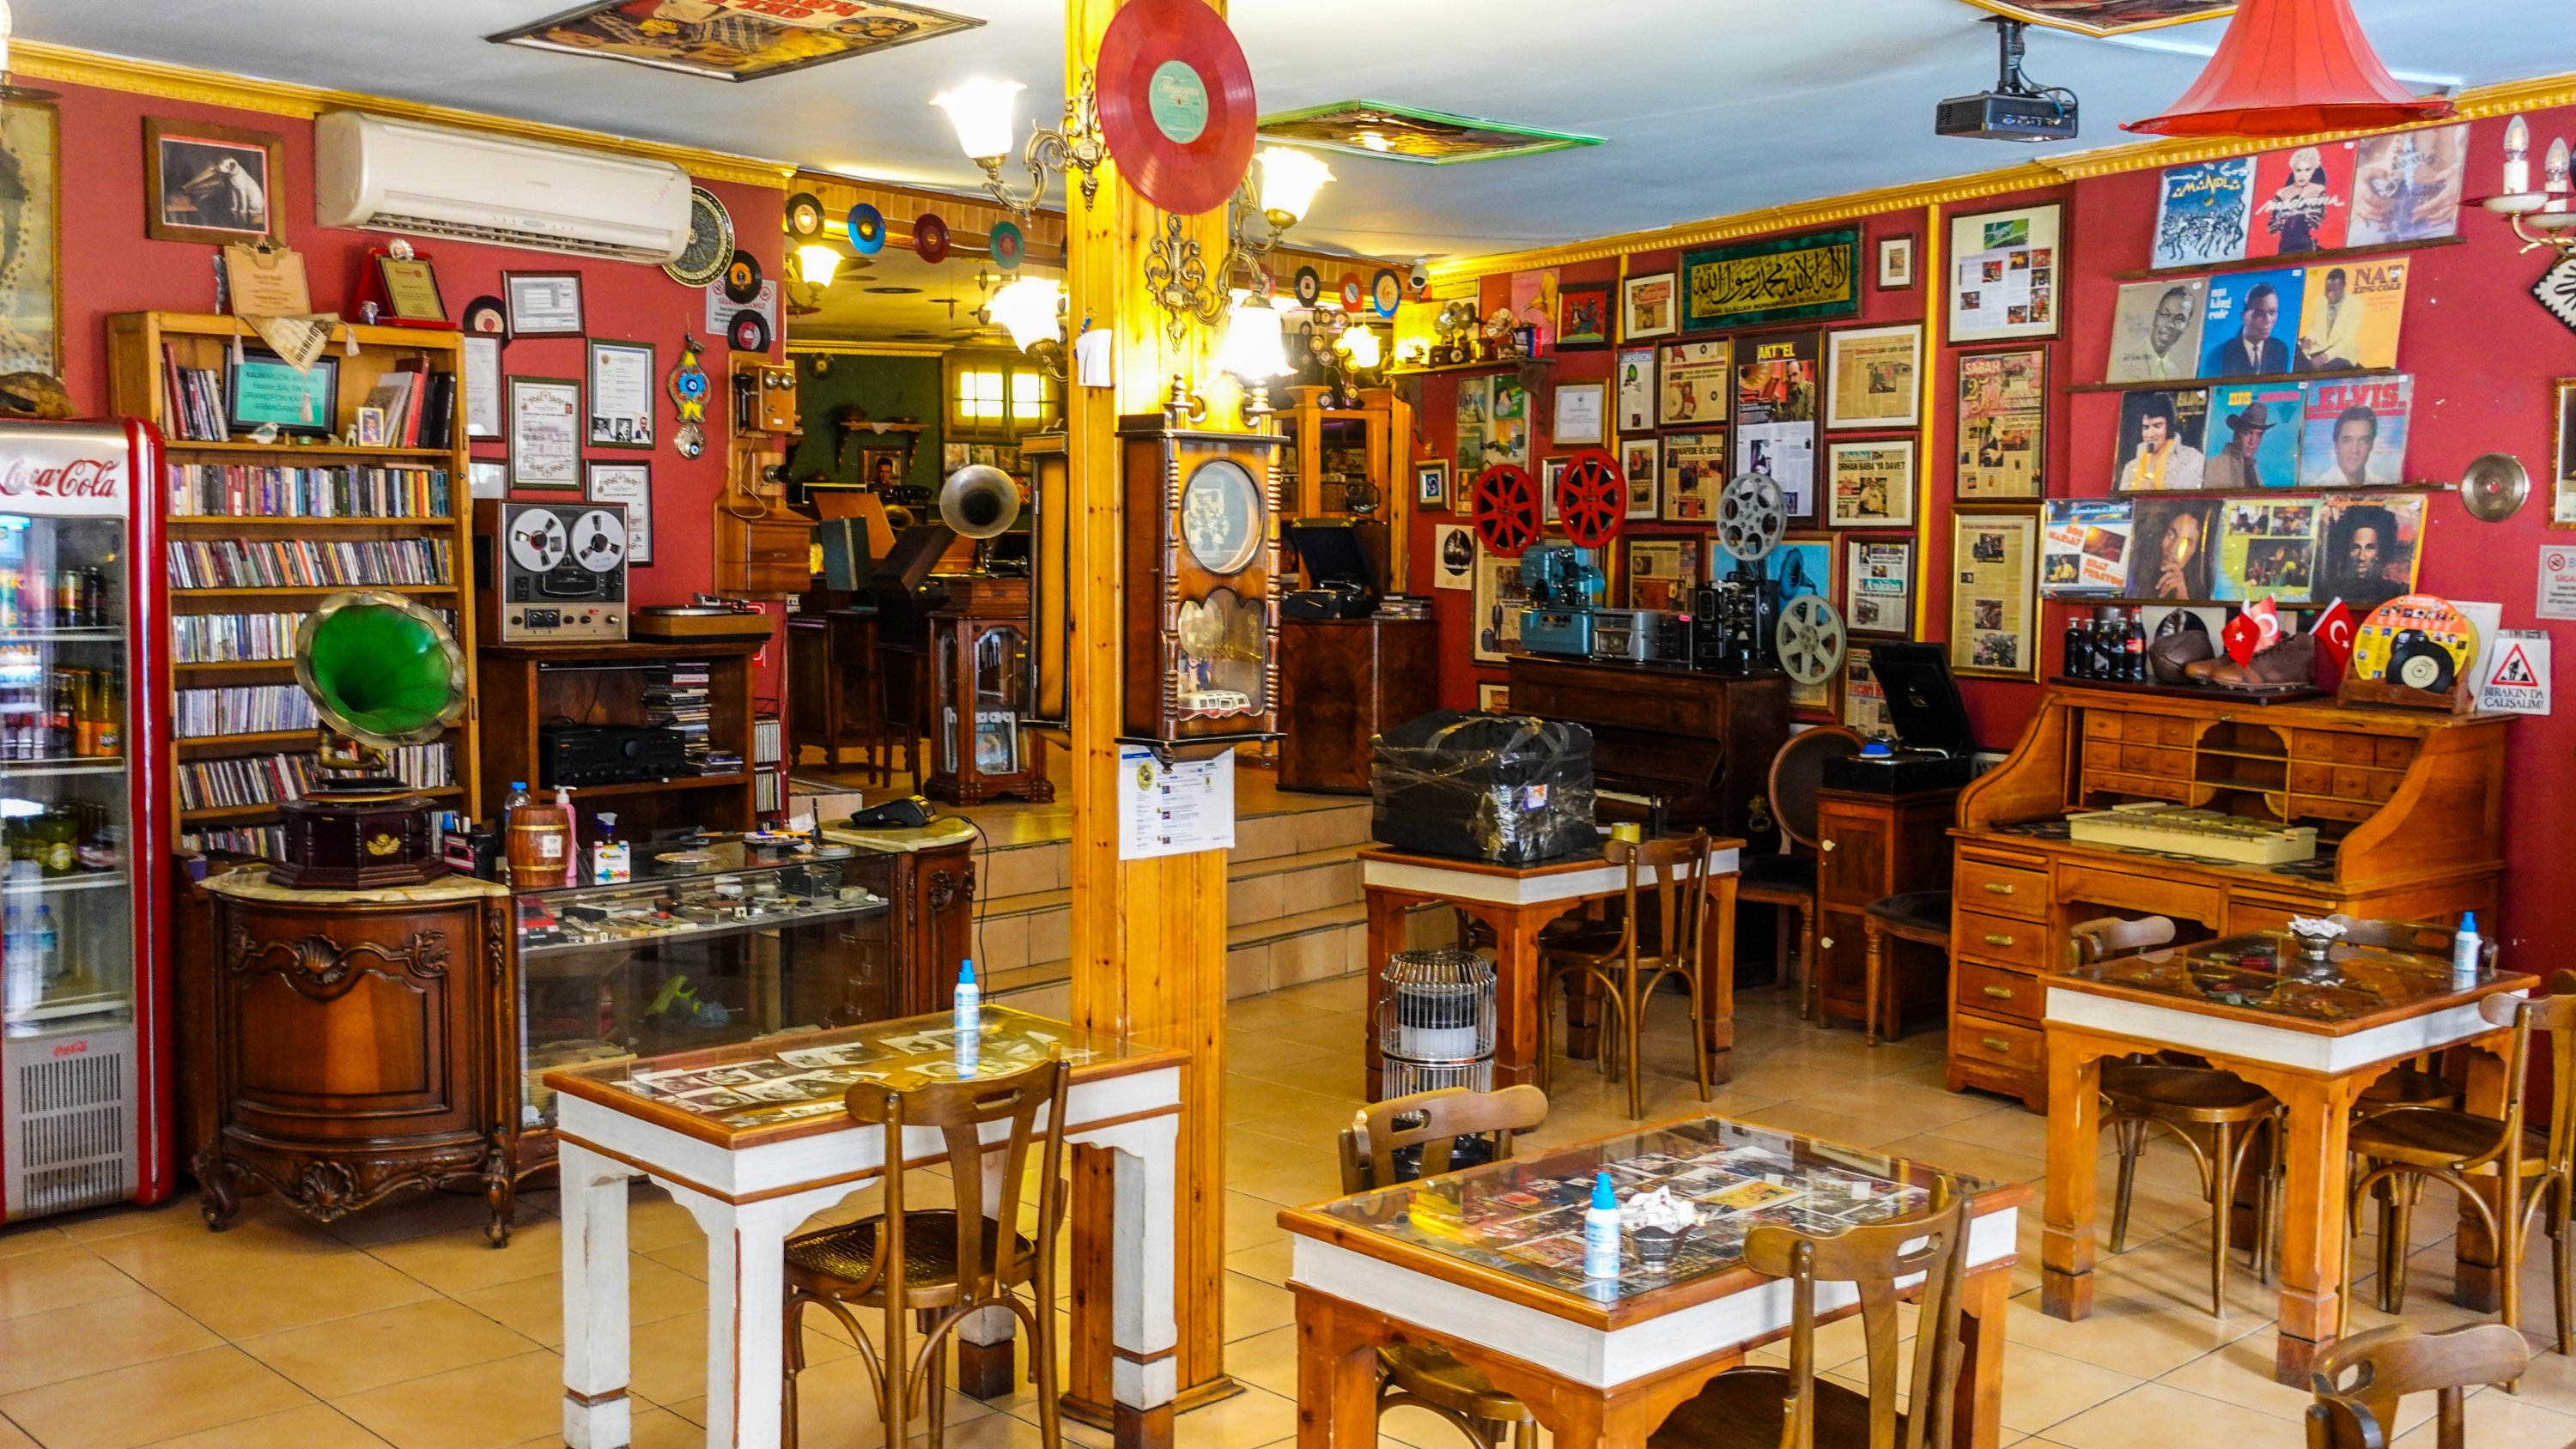 Gramofon Cafe is one of the most authentic cafes in Ankara. (Photo by Argun Konuk)